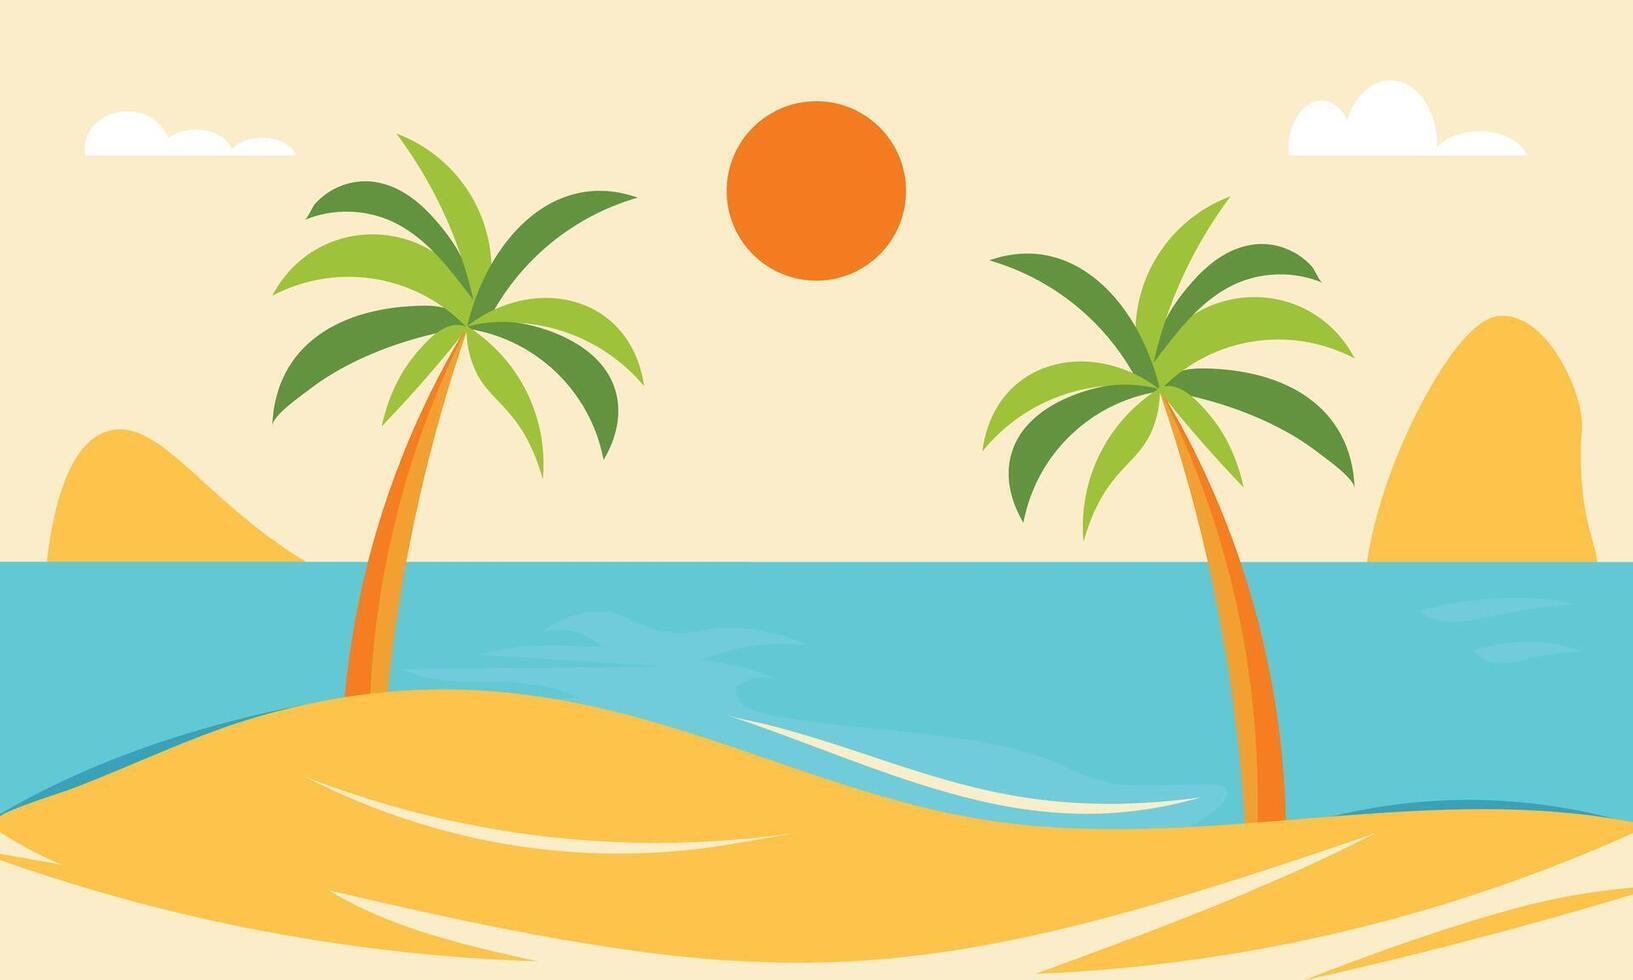 Summer landscape illustration. Beach with palms vector